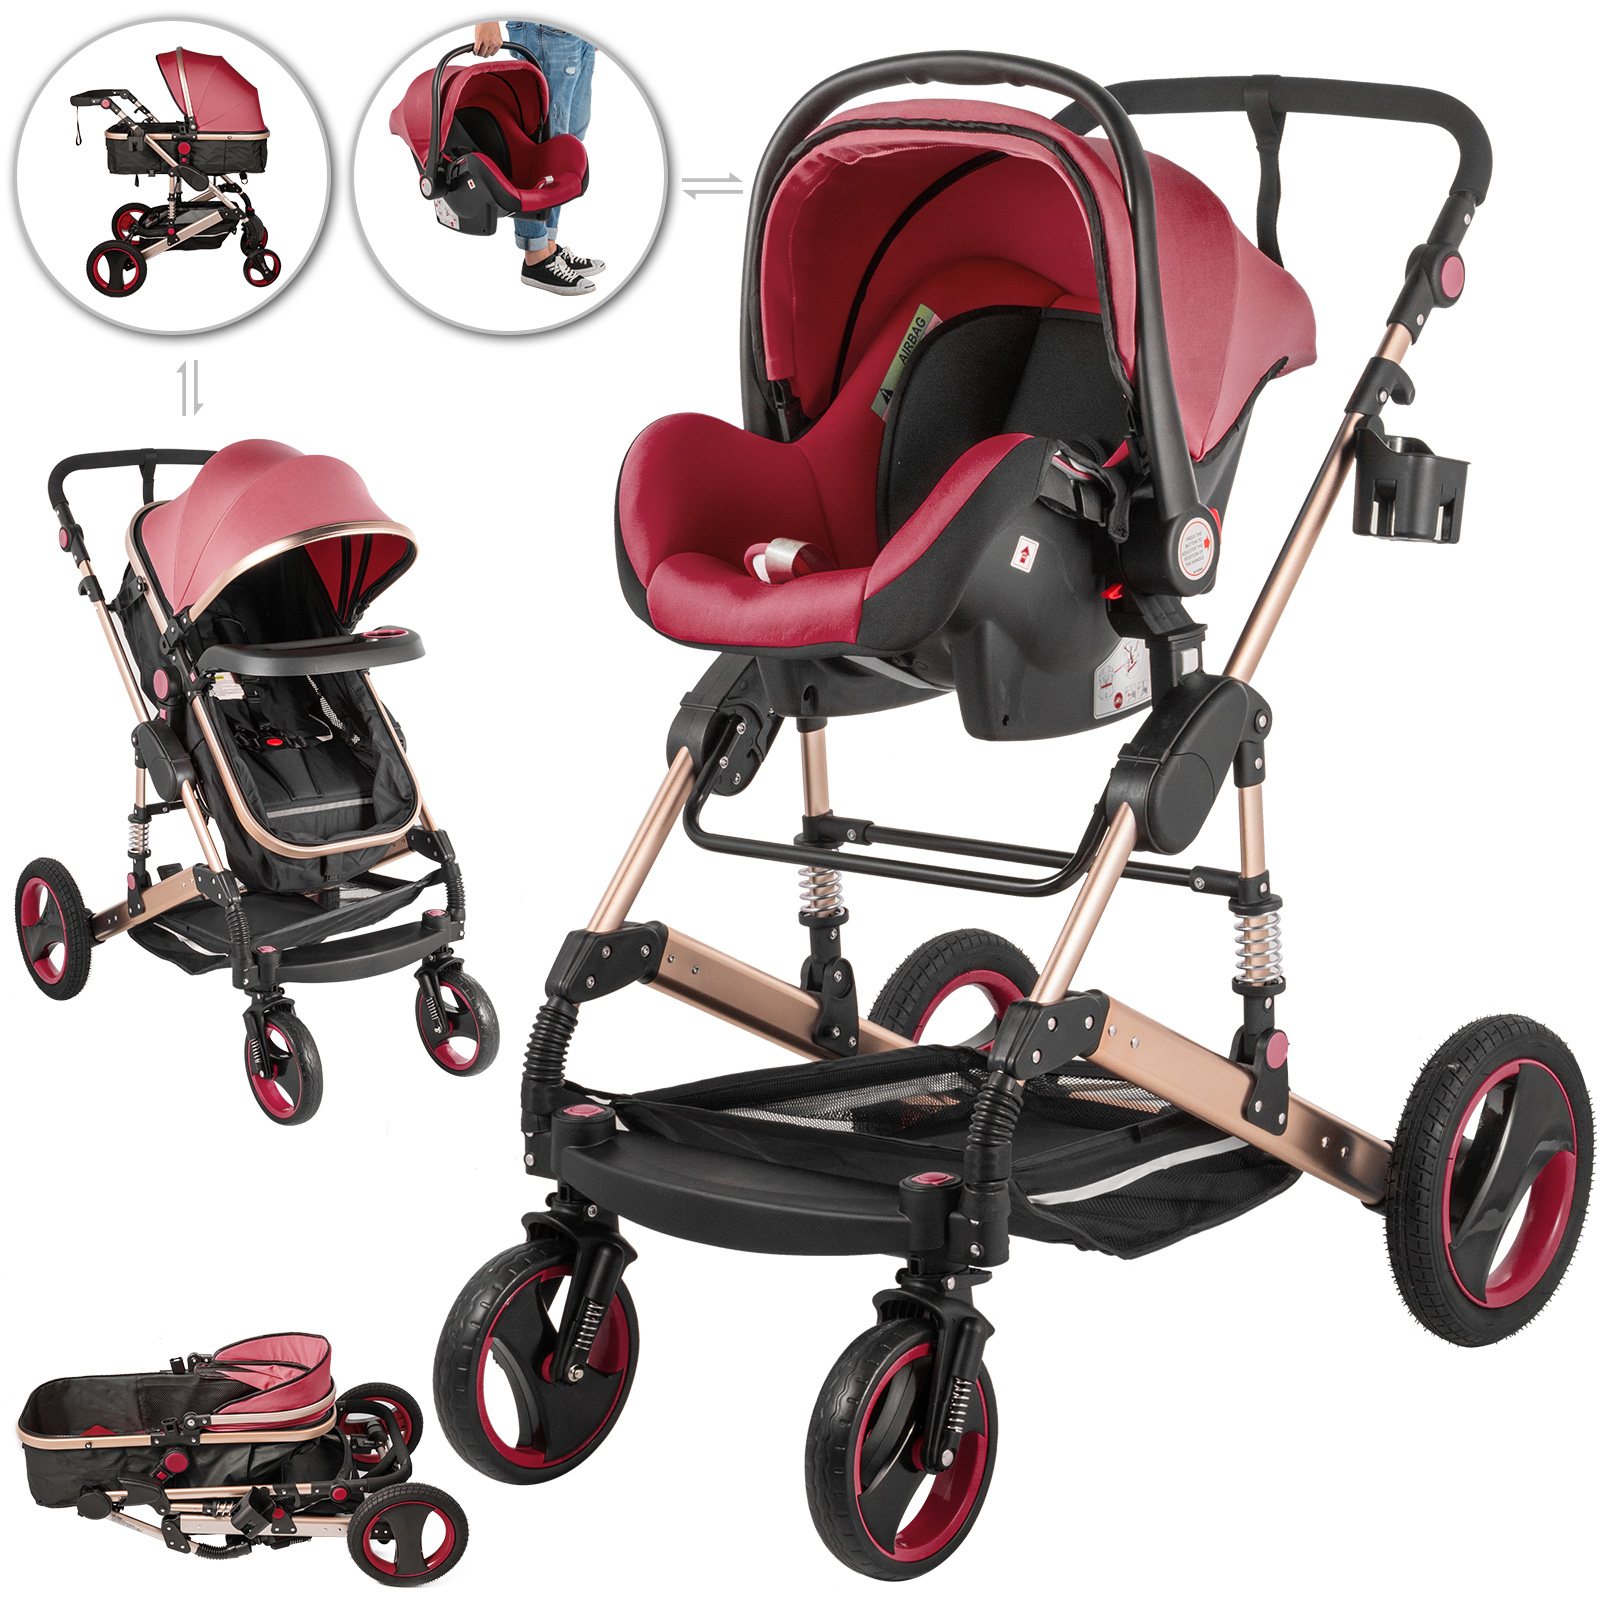 LUXURY baby stroller foldable jogger Carriage Infant Travel system PU pushchair 